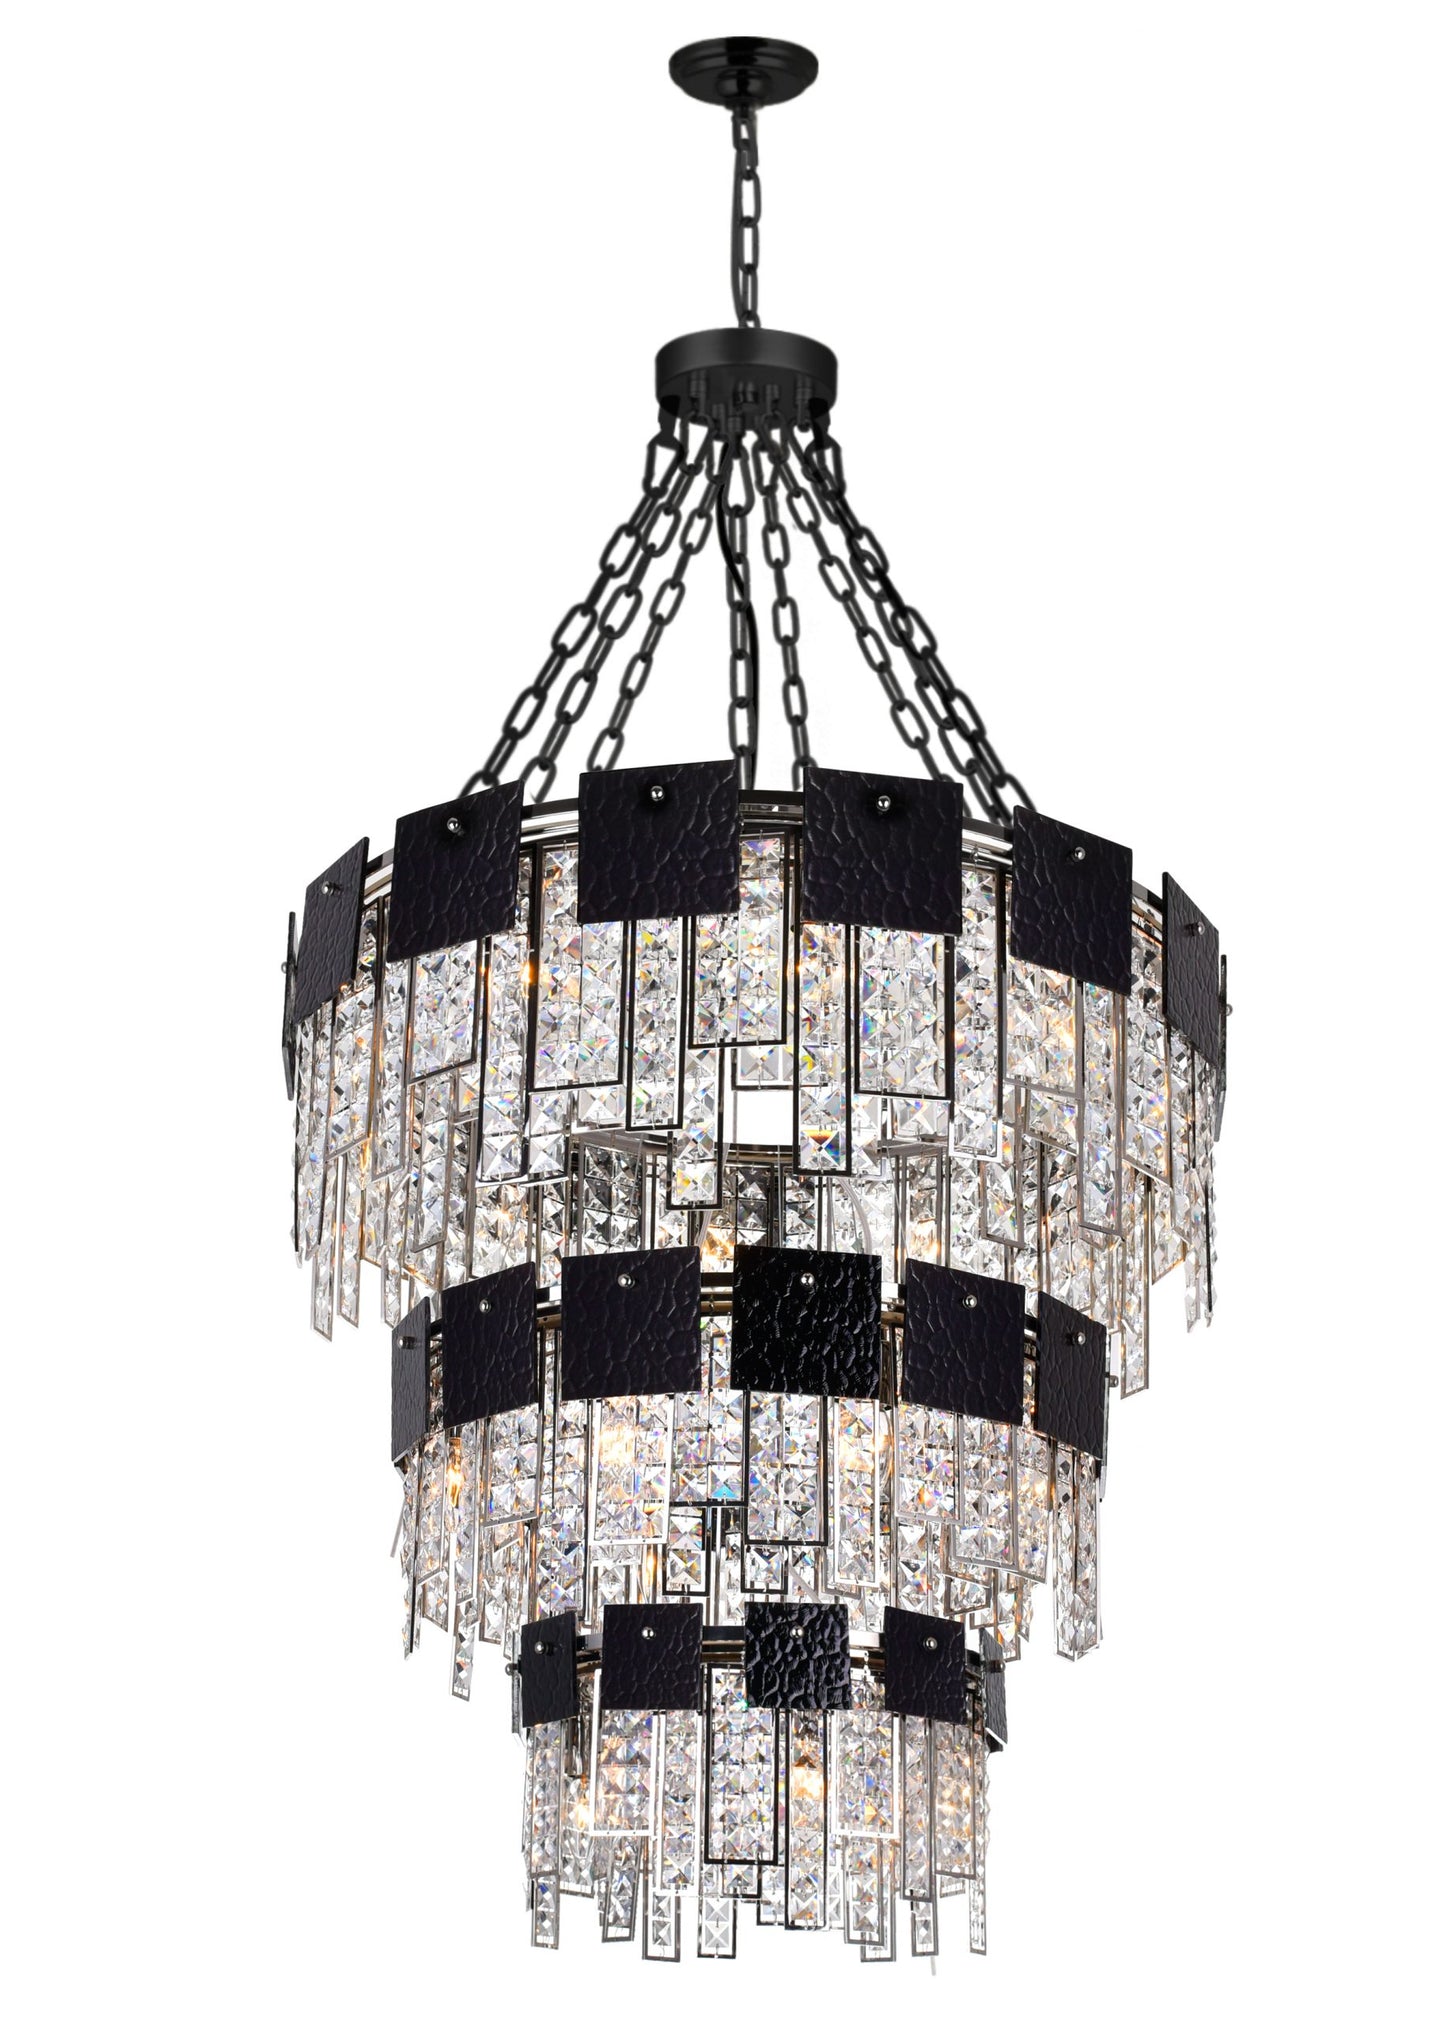 24 LIGHT DOWN CHANDELIER WITH POLISHED NICKEL FINISH - Dreamart Gallery